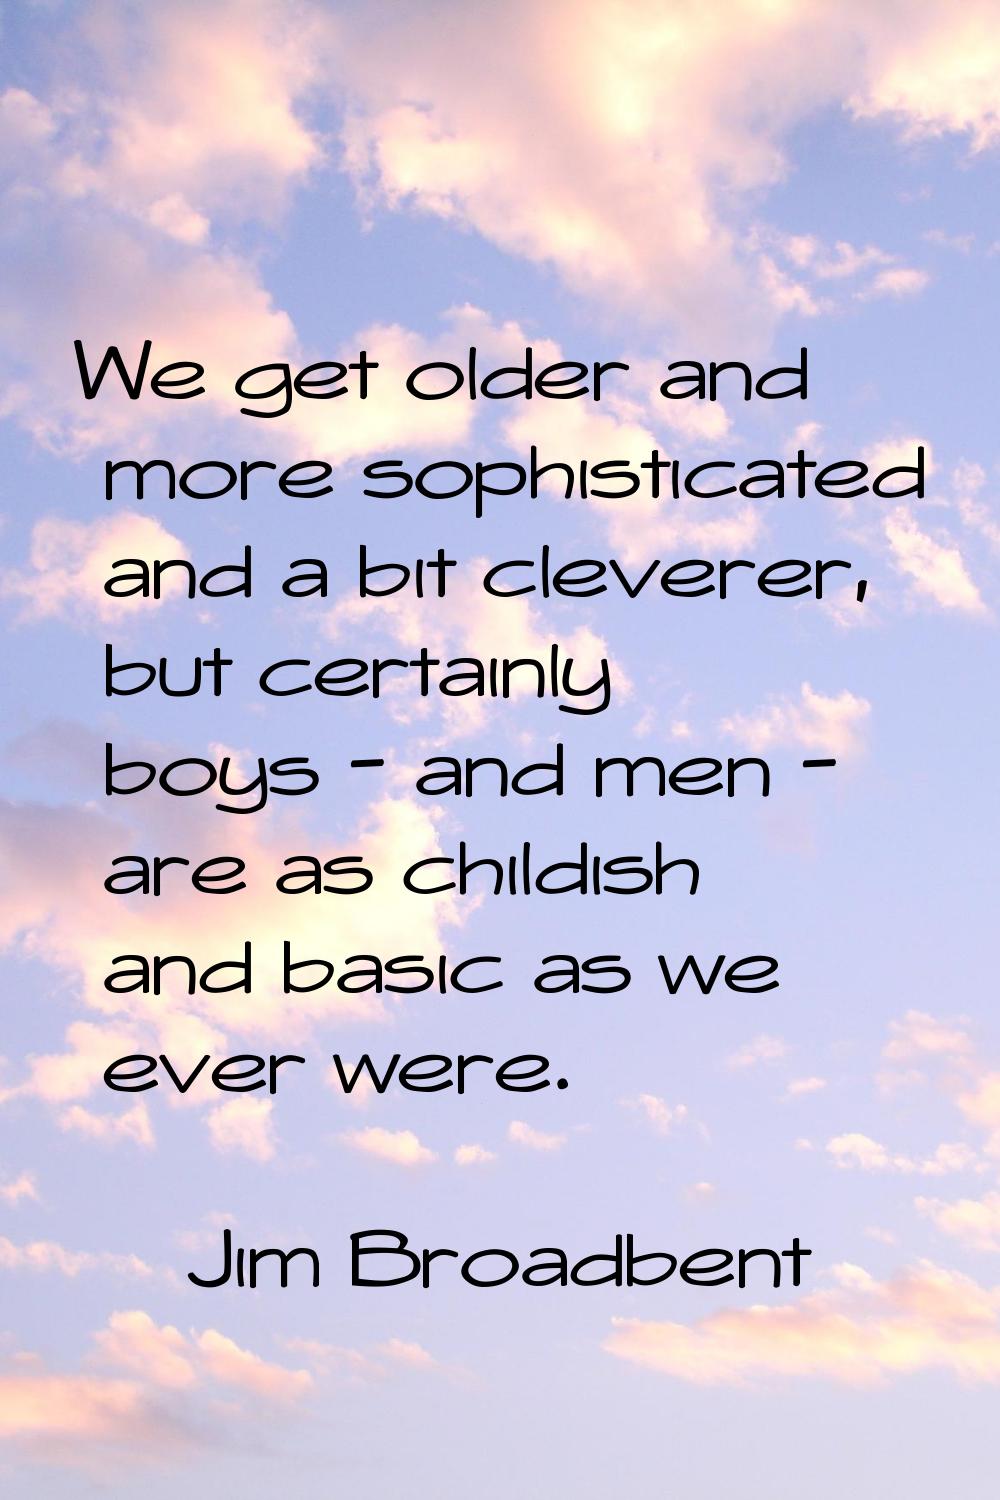 We get older and more sophisticated and a bit cleverer, but certainly boys - and men - are as child